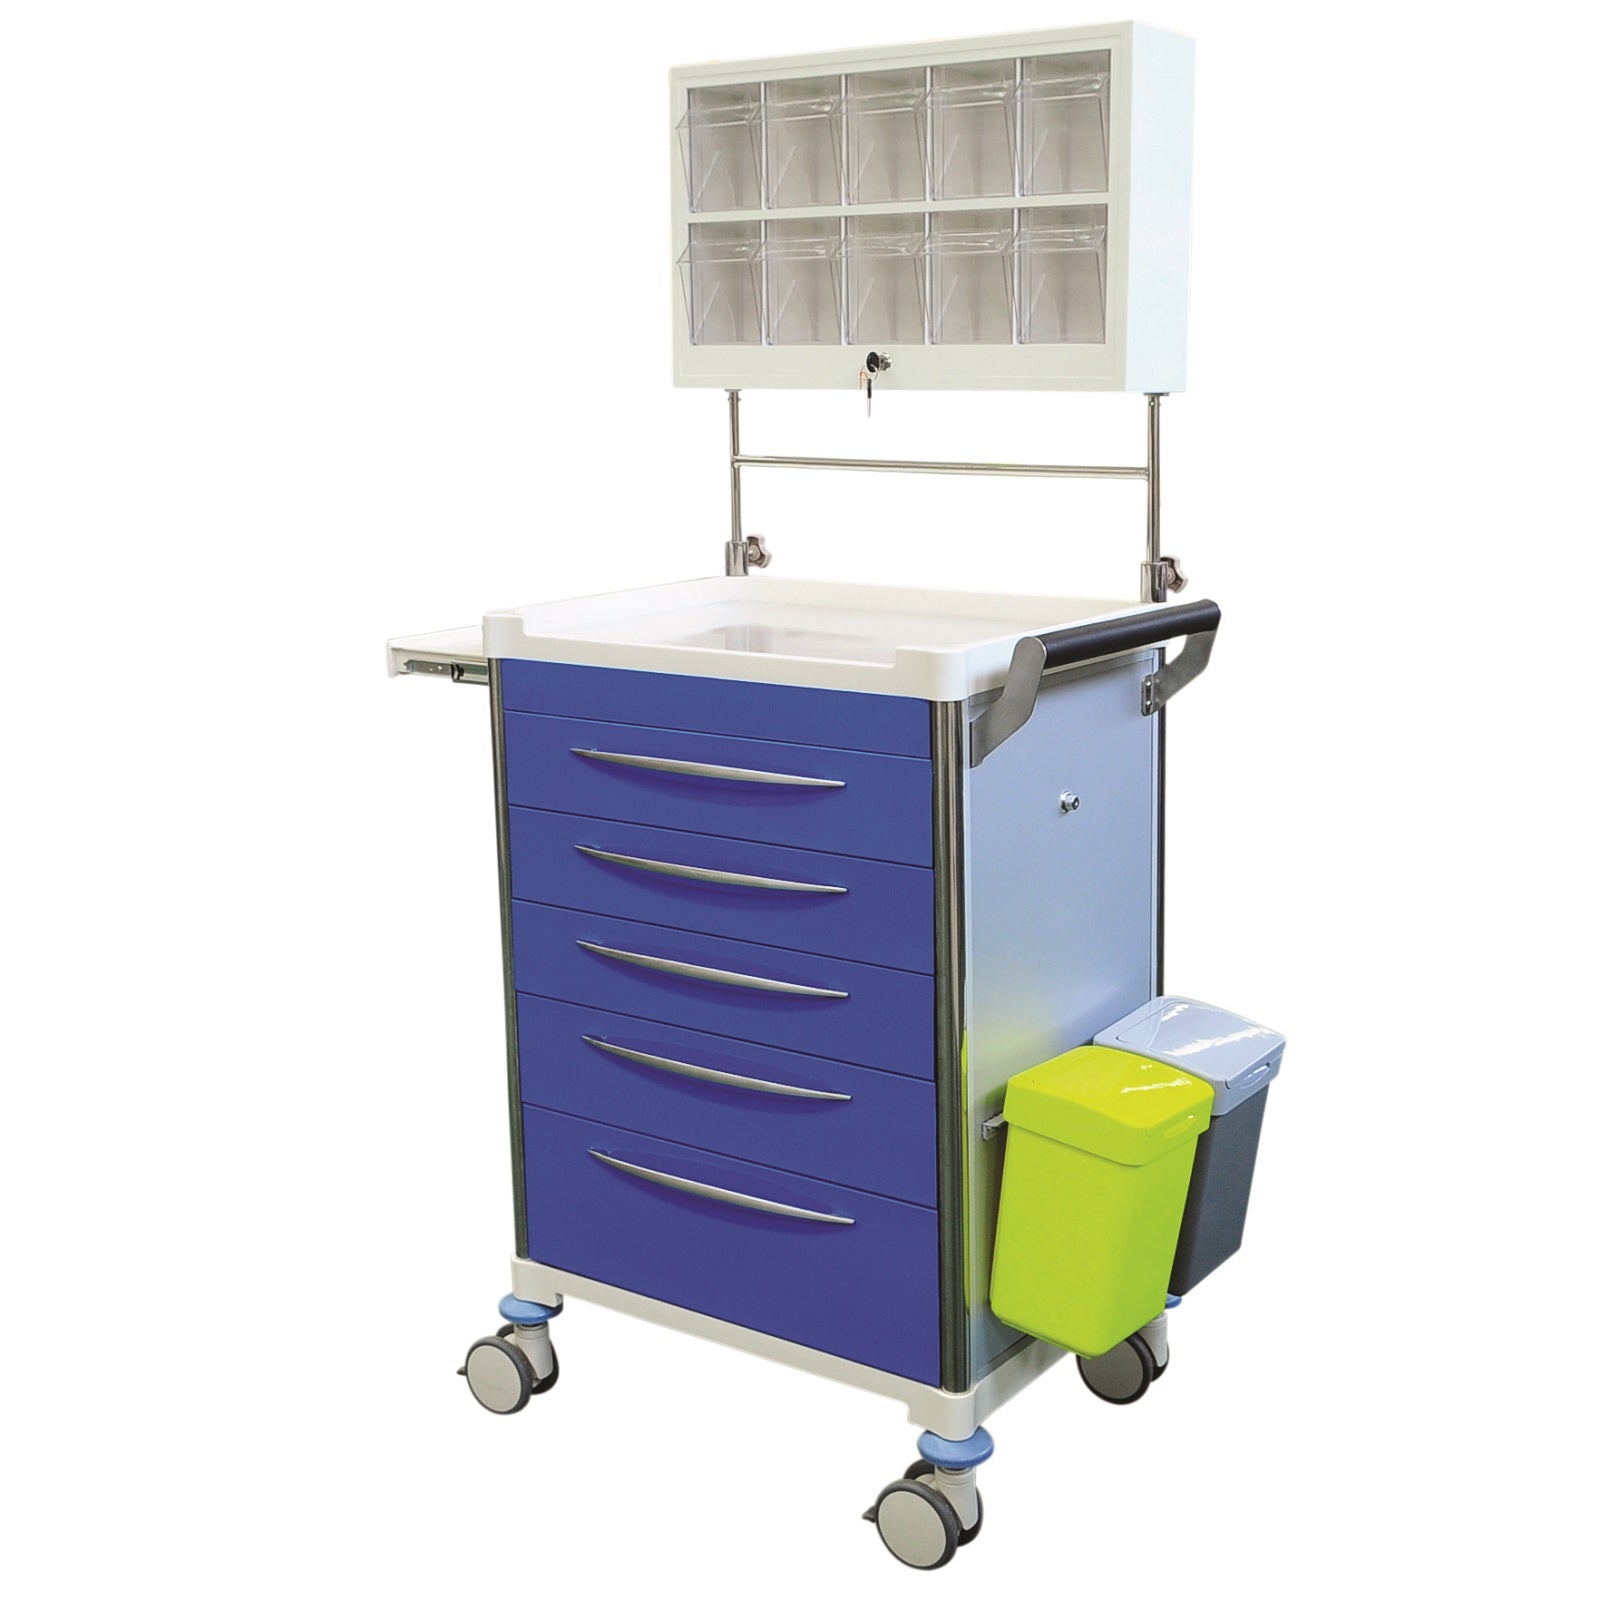 Anesthesia trolley with an extension table, waste bin, stainless steel wire basket and soft closing drawers.